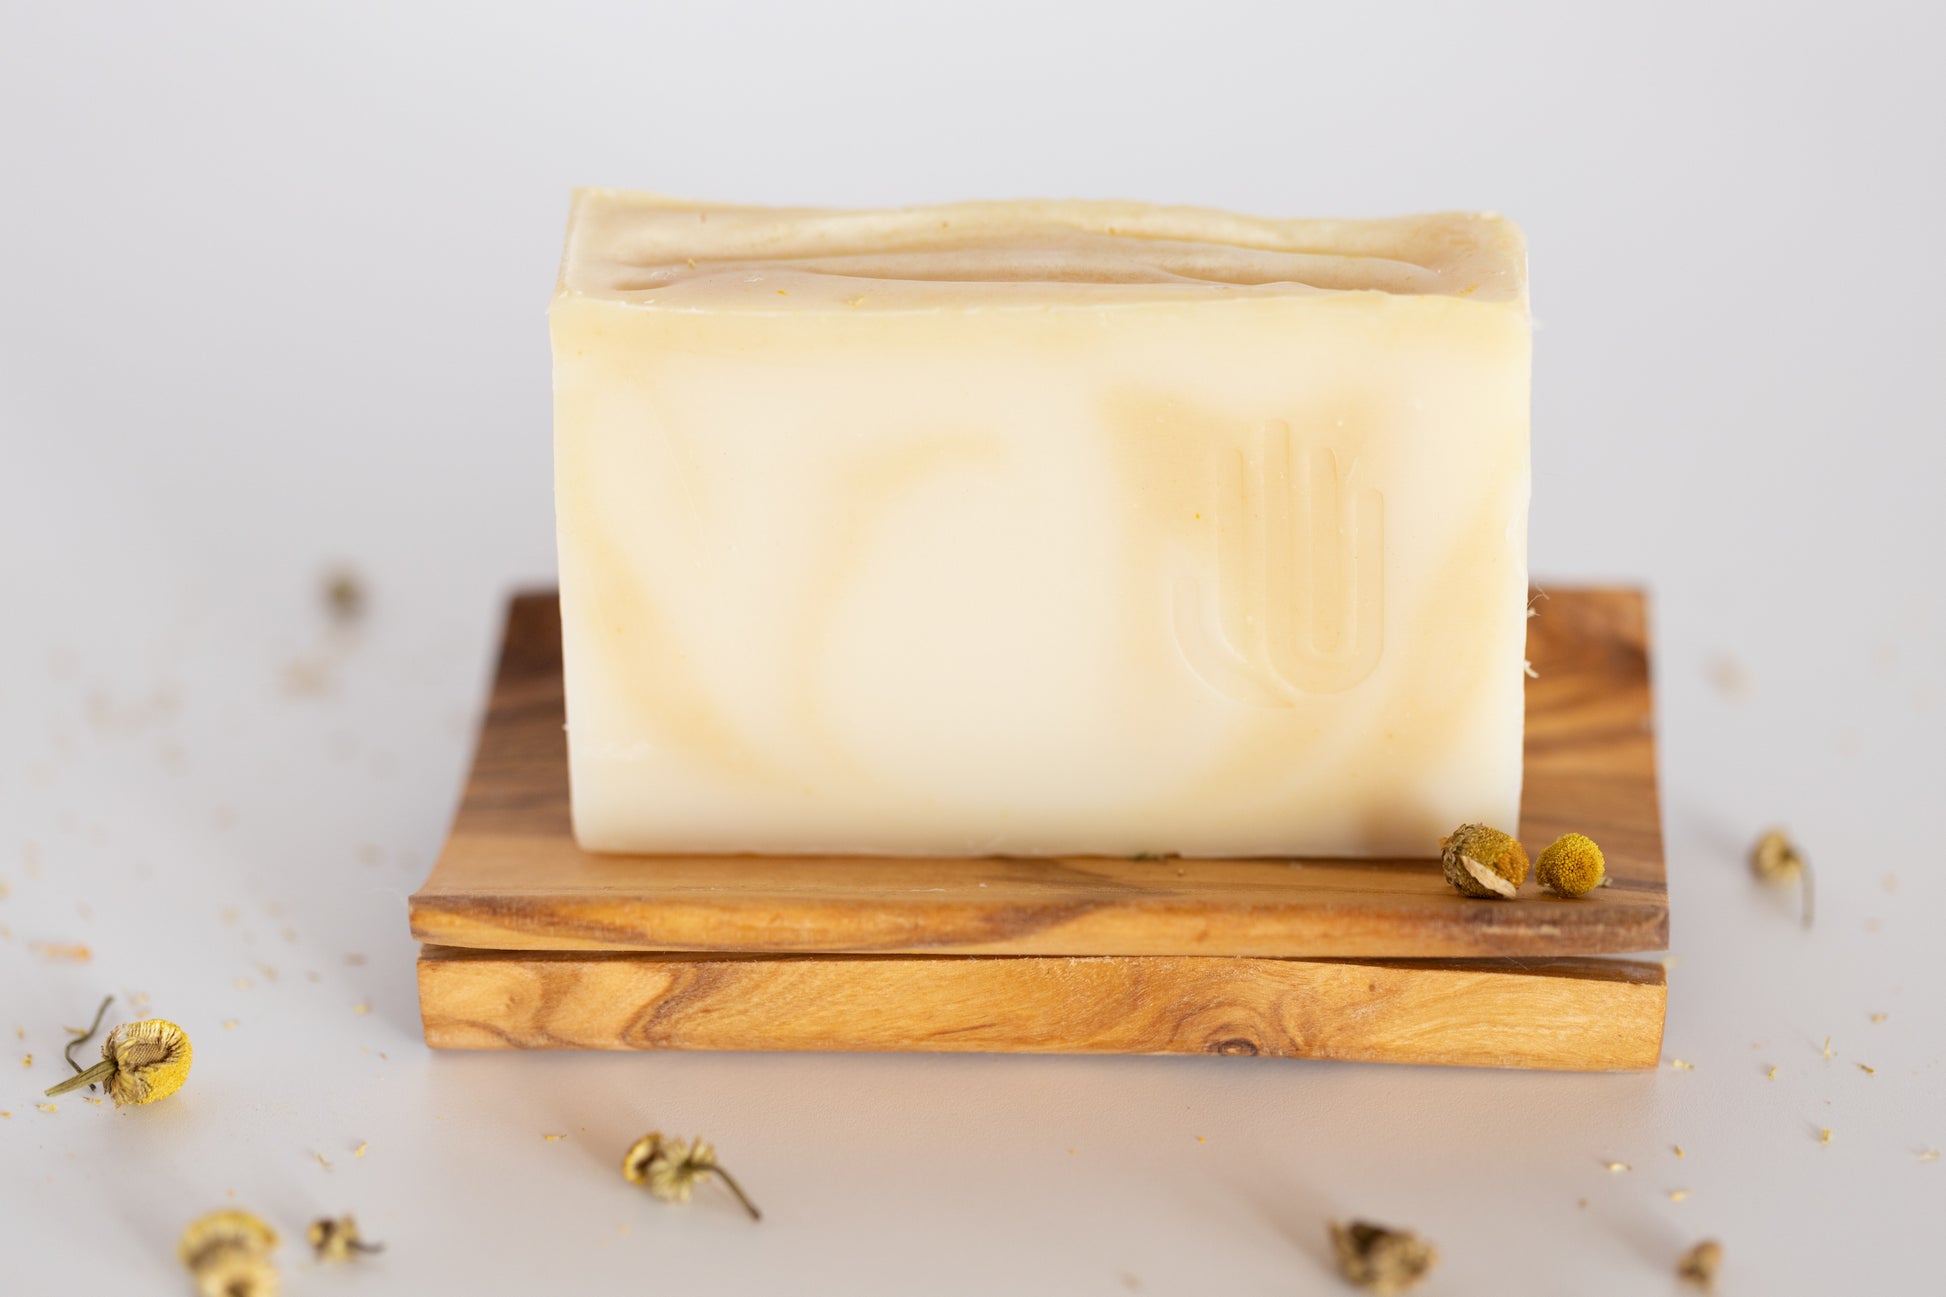 square white and yellow swirled soap sitting on a wood soap dish with chamomile buds sprinkled around